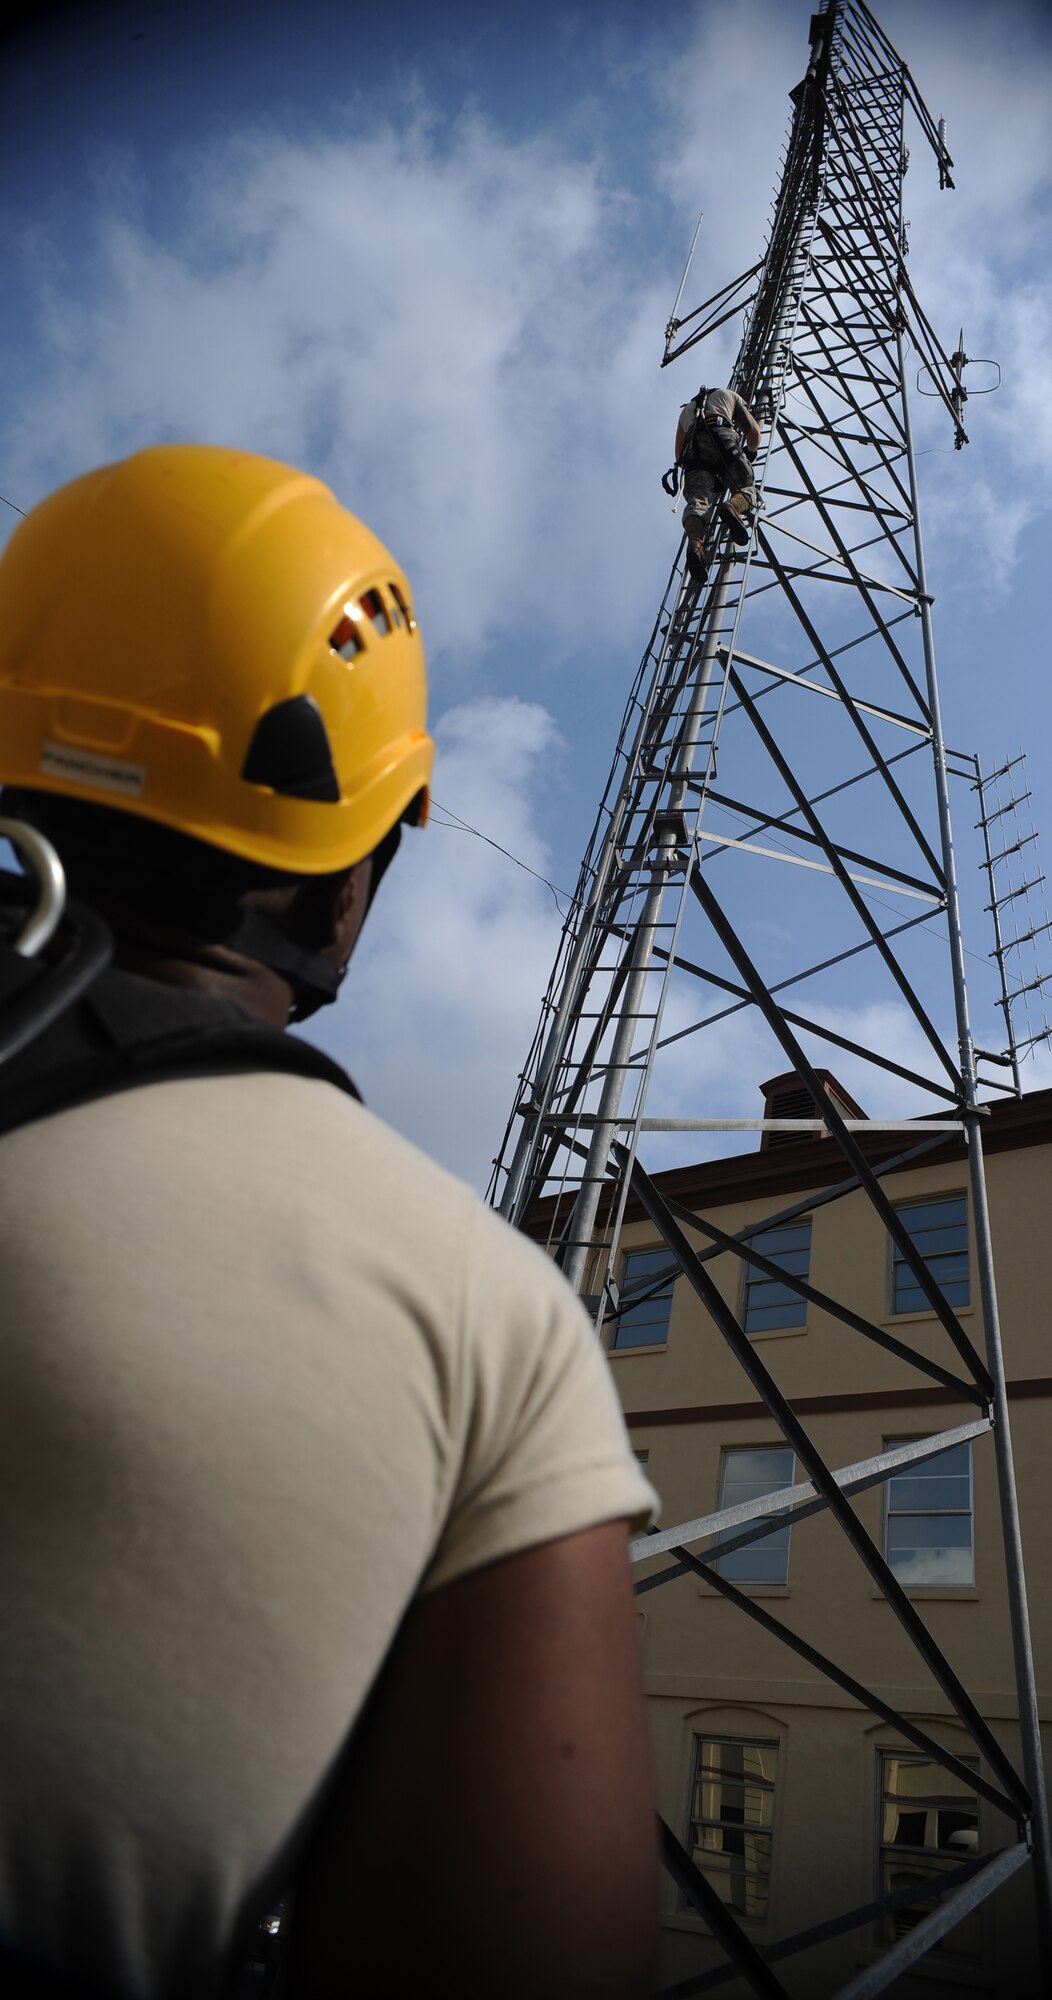 Airman 1st Class Major Powell watches as Airman 1st Class Creston Jenkins, both members of the 2nd Communications Squadron, climbs down from an antenna tower on Barksdale Air Force Base, La., Sept. 18. Powell acted as the safety observer during Jenkins' descent. Safety observers alert climbers of any dangers or hazards, assist climbers with tools and provide medical assistance in the event of a mishap. (U.S. Air Force photo/Senior Airman Micaiah Anthony)(RELEASED)